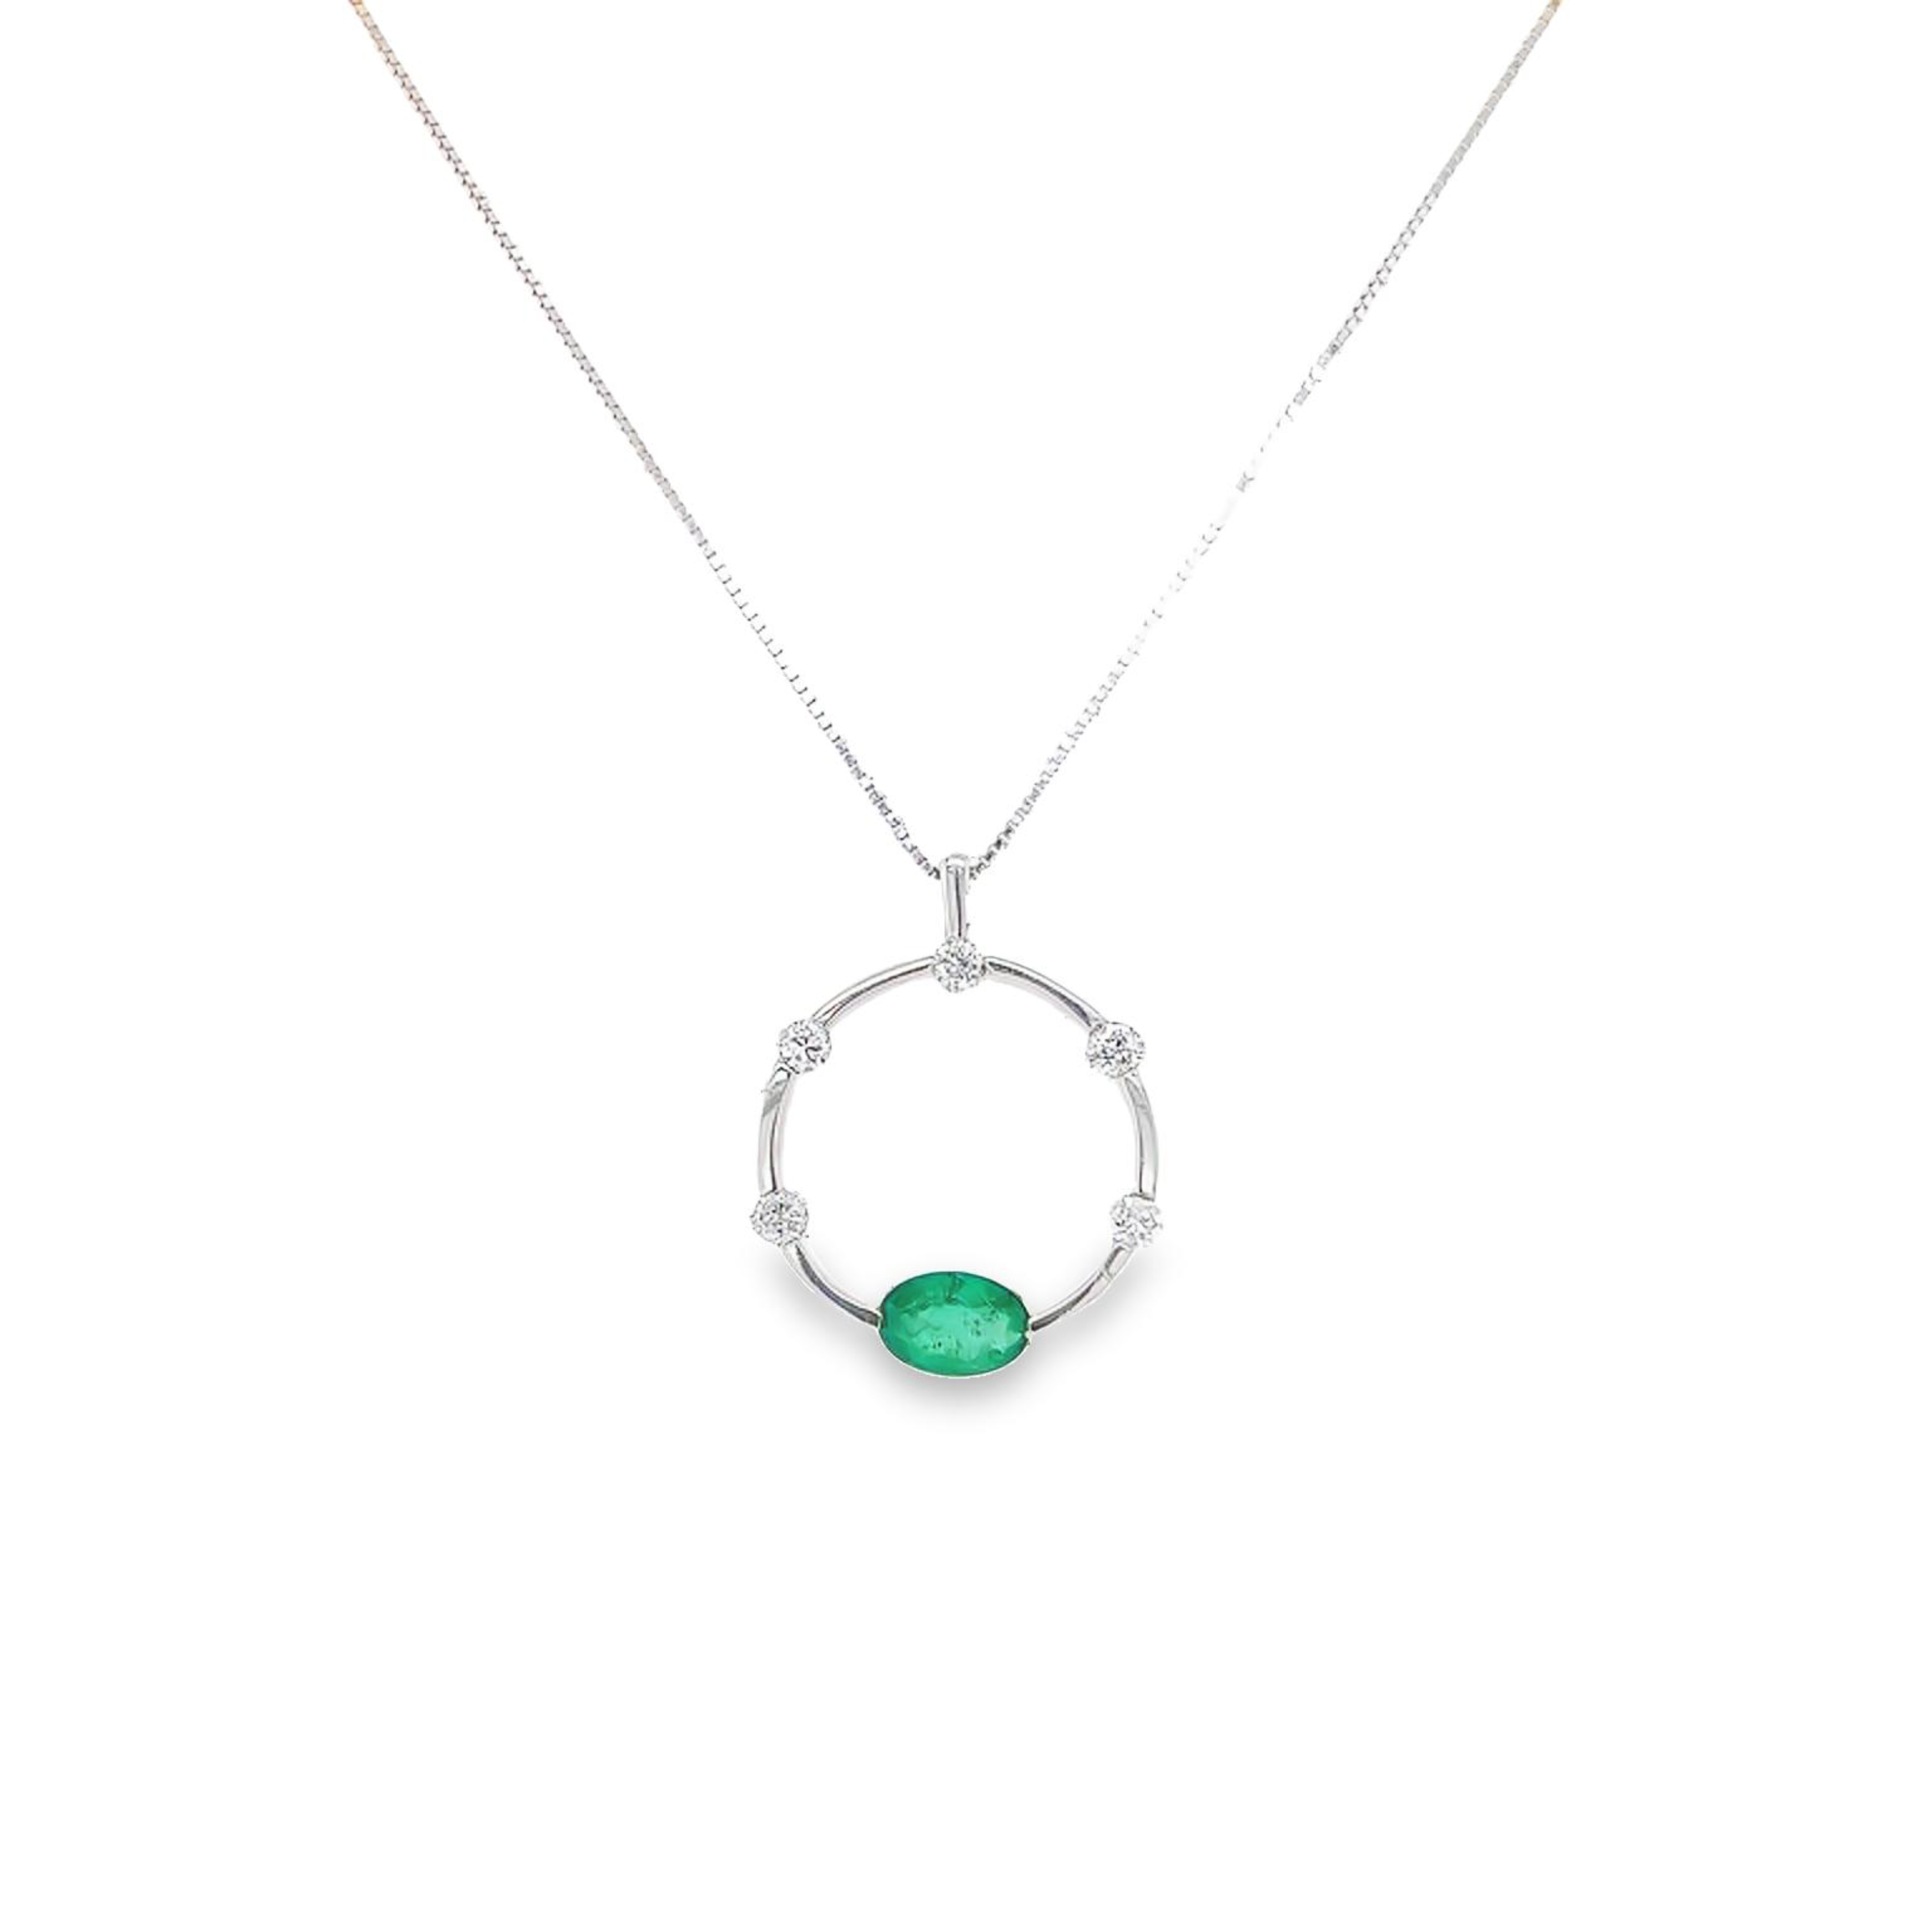 14 Karat white gold circle pendants with One 0.50Ct oval Emerald and 5=0.20 total weight round Brilliant G SI Diamonds